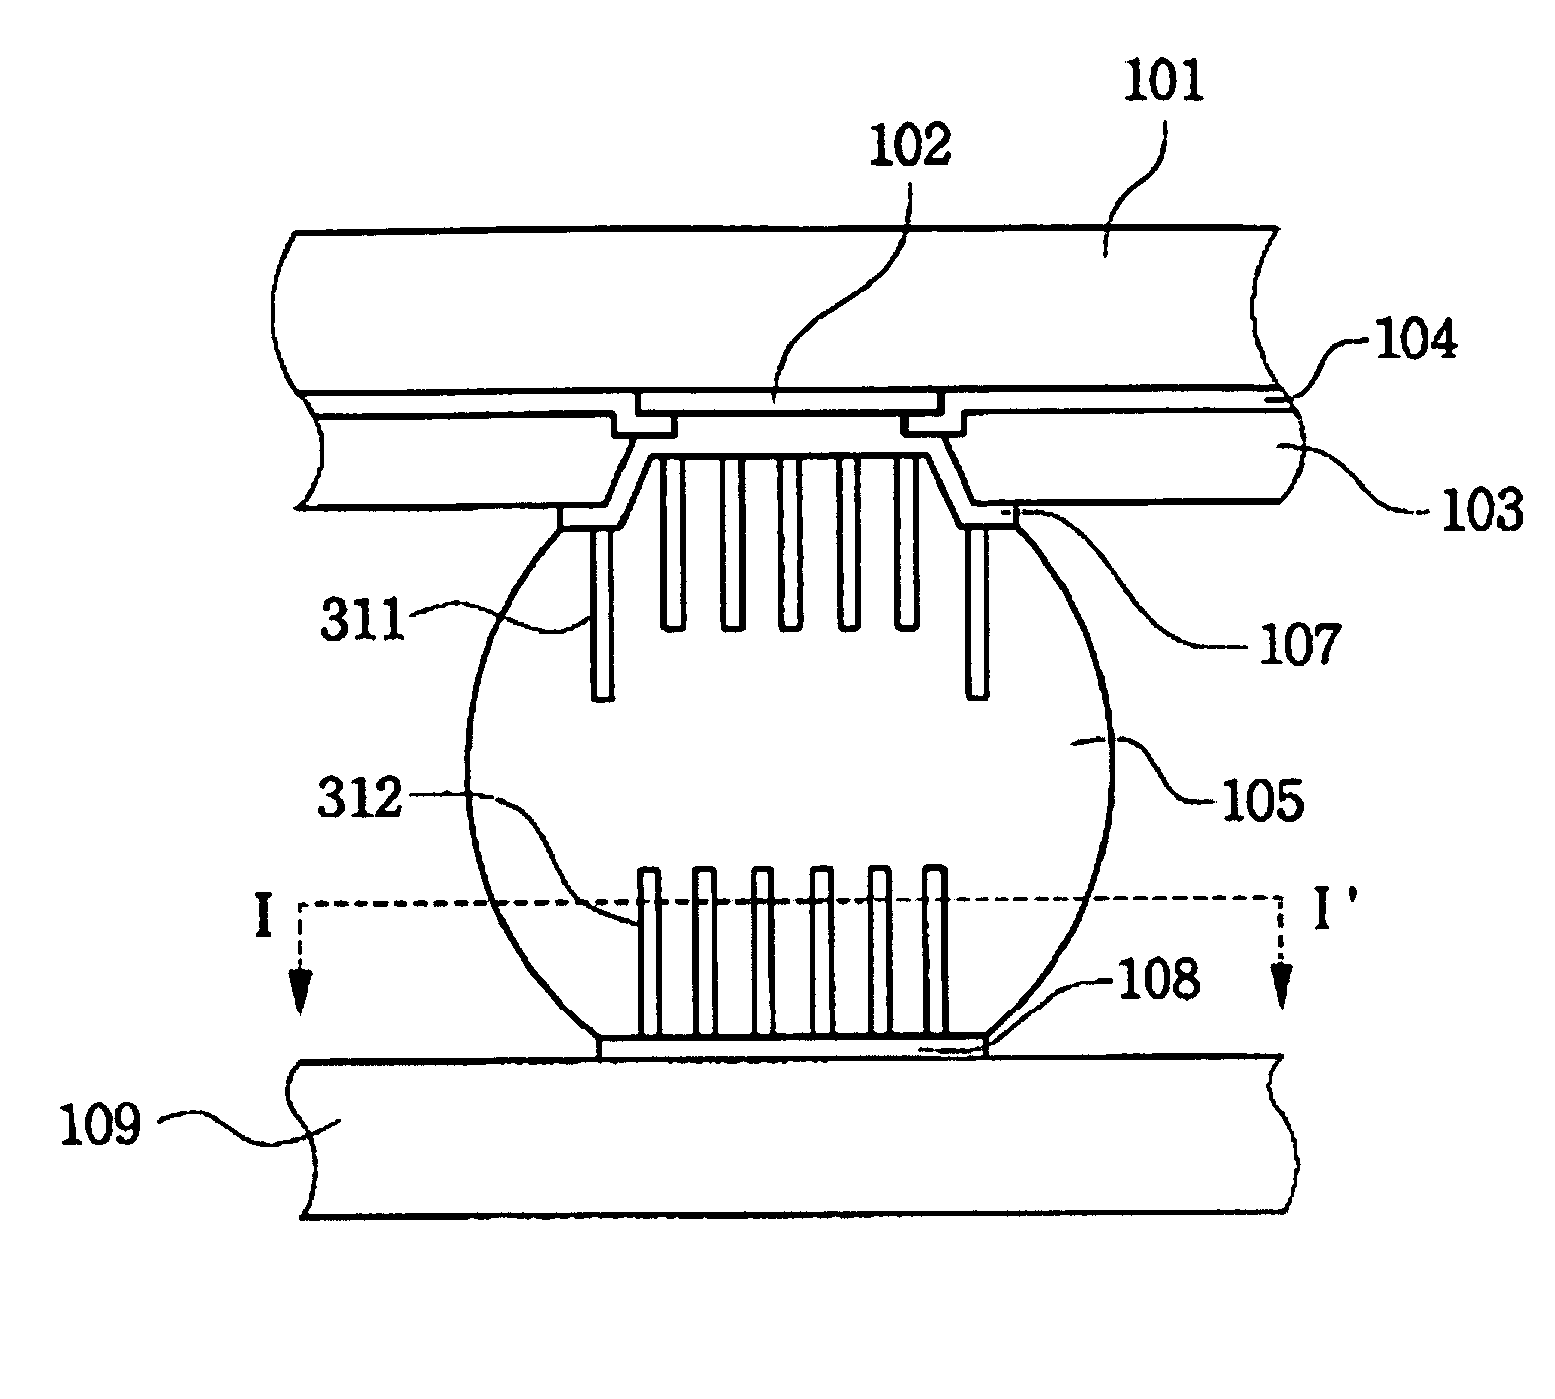 Reinforced solder bump structure and method for forming a reinforced solder bump